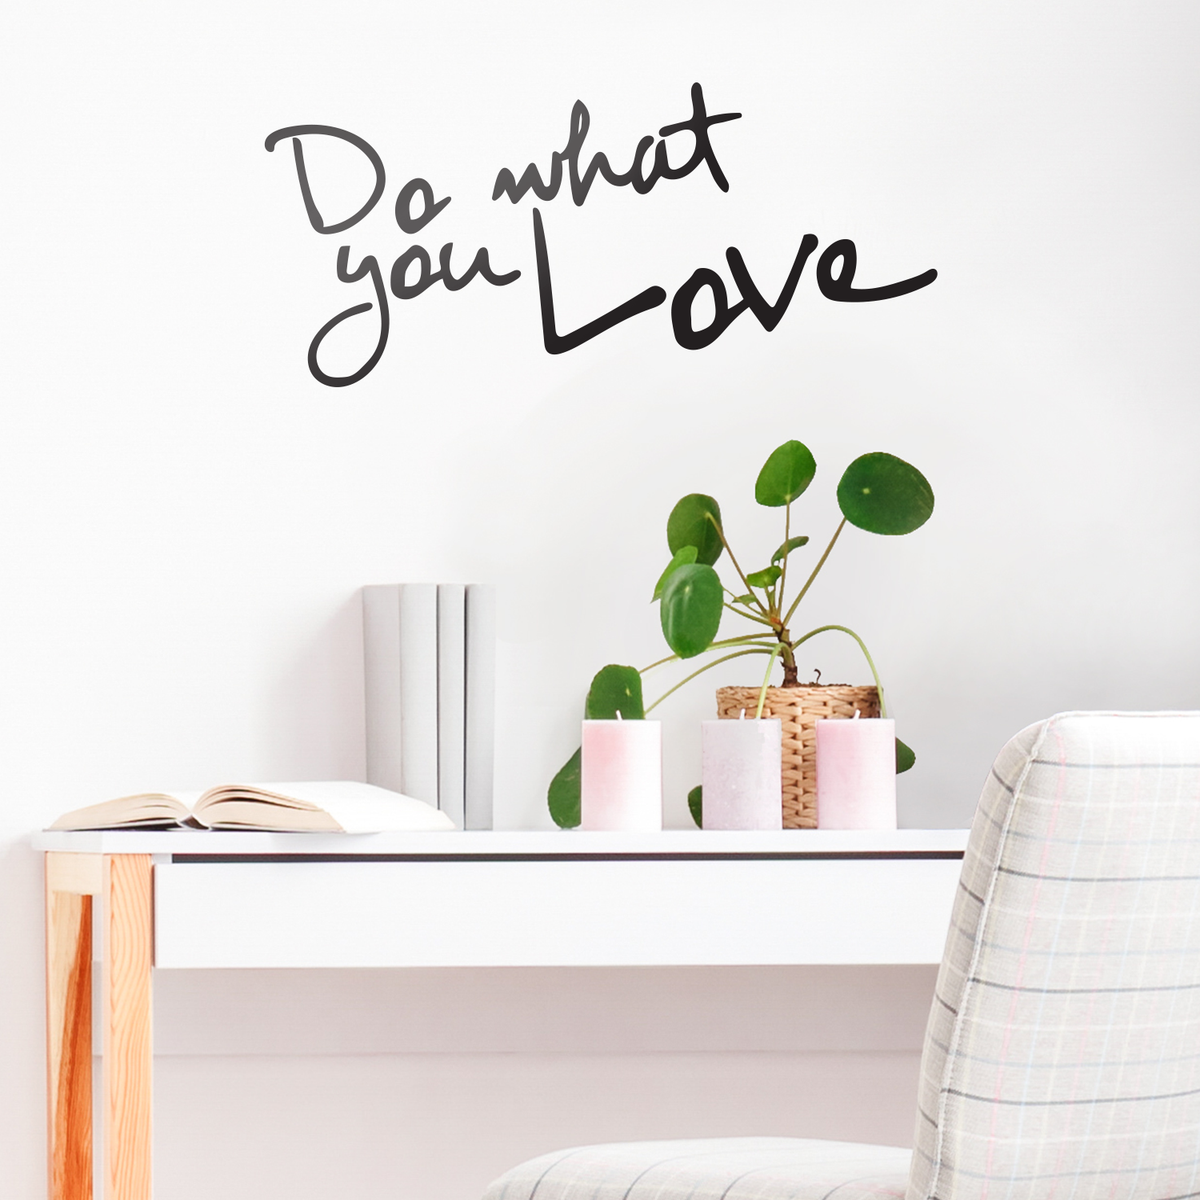 14 Imprinted What Inspirational - Designs Do Love Art - Wall Life x Decal Quotes You 30\